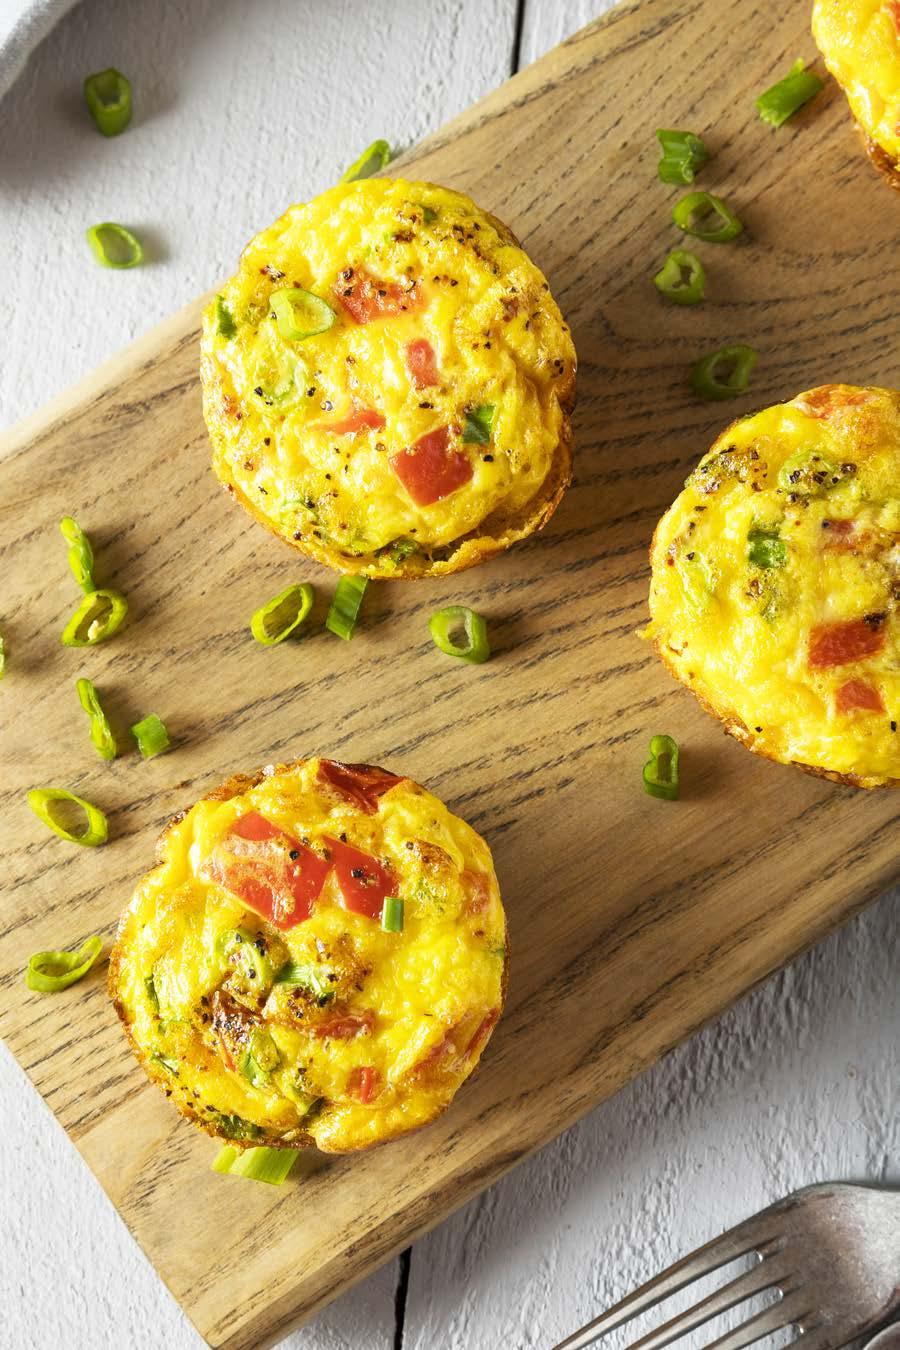 30Energizing Breakfast Recipes to